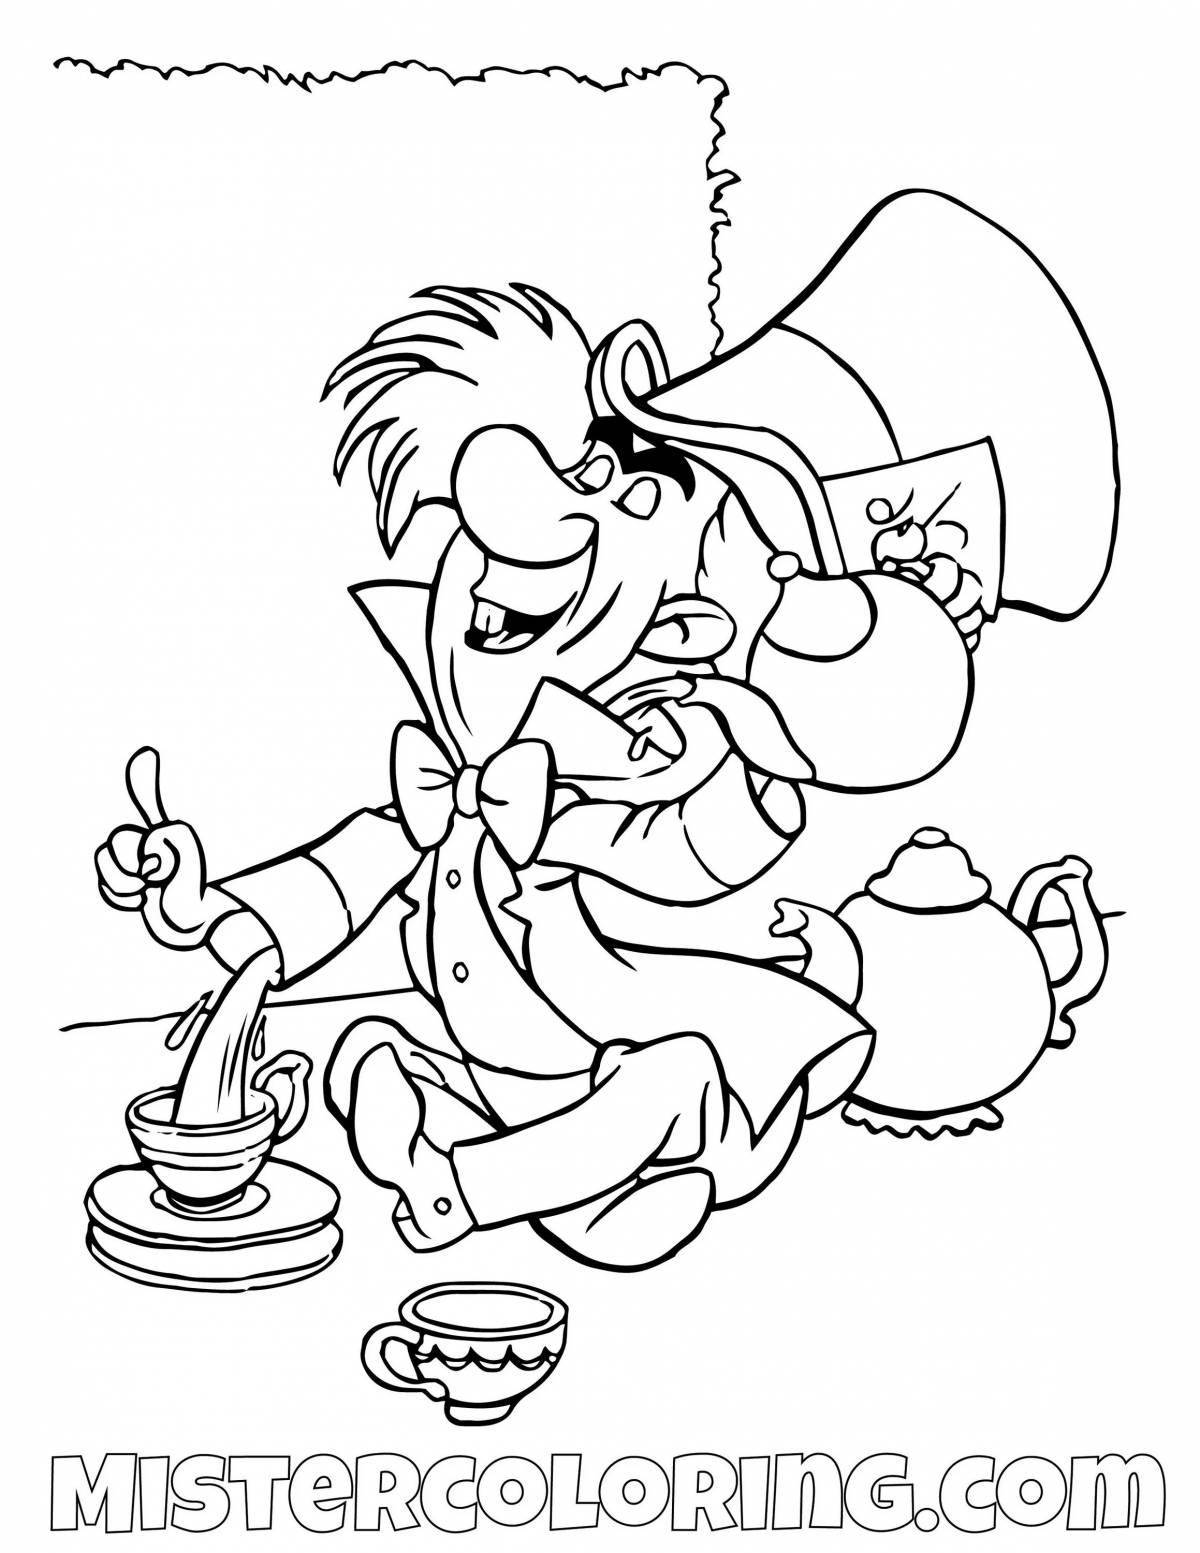 Magic Hatter coloring page